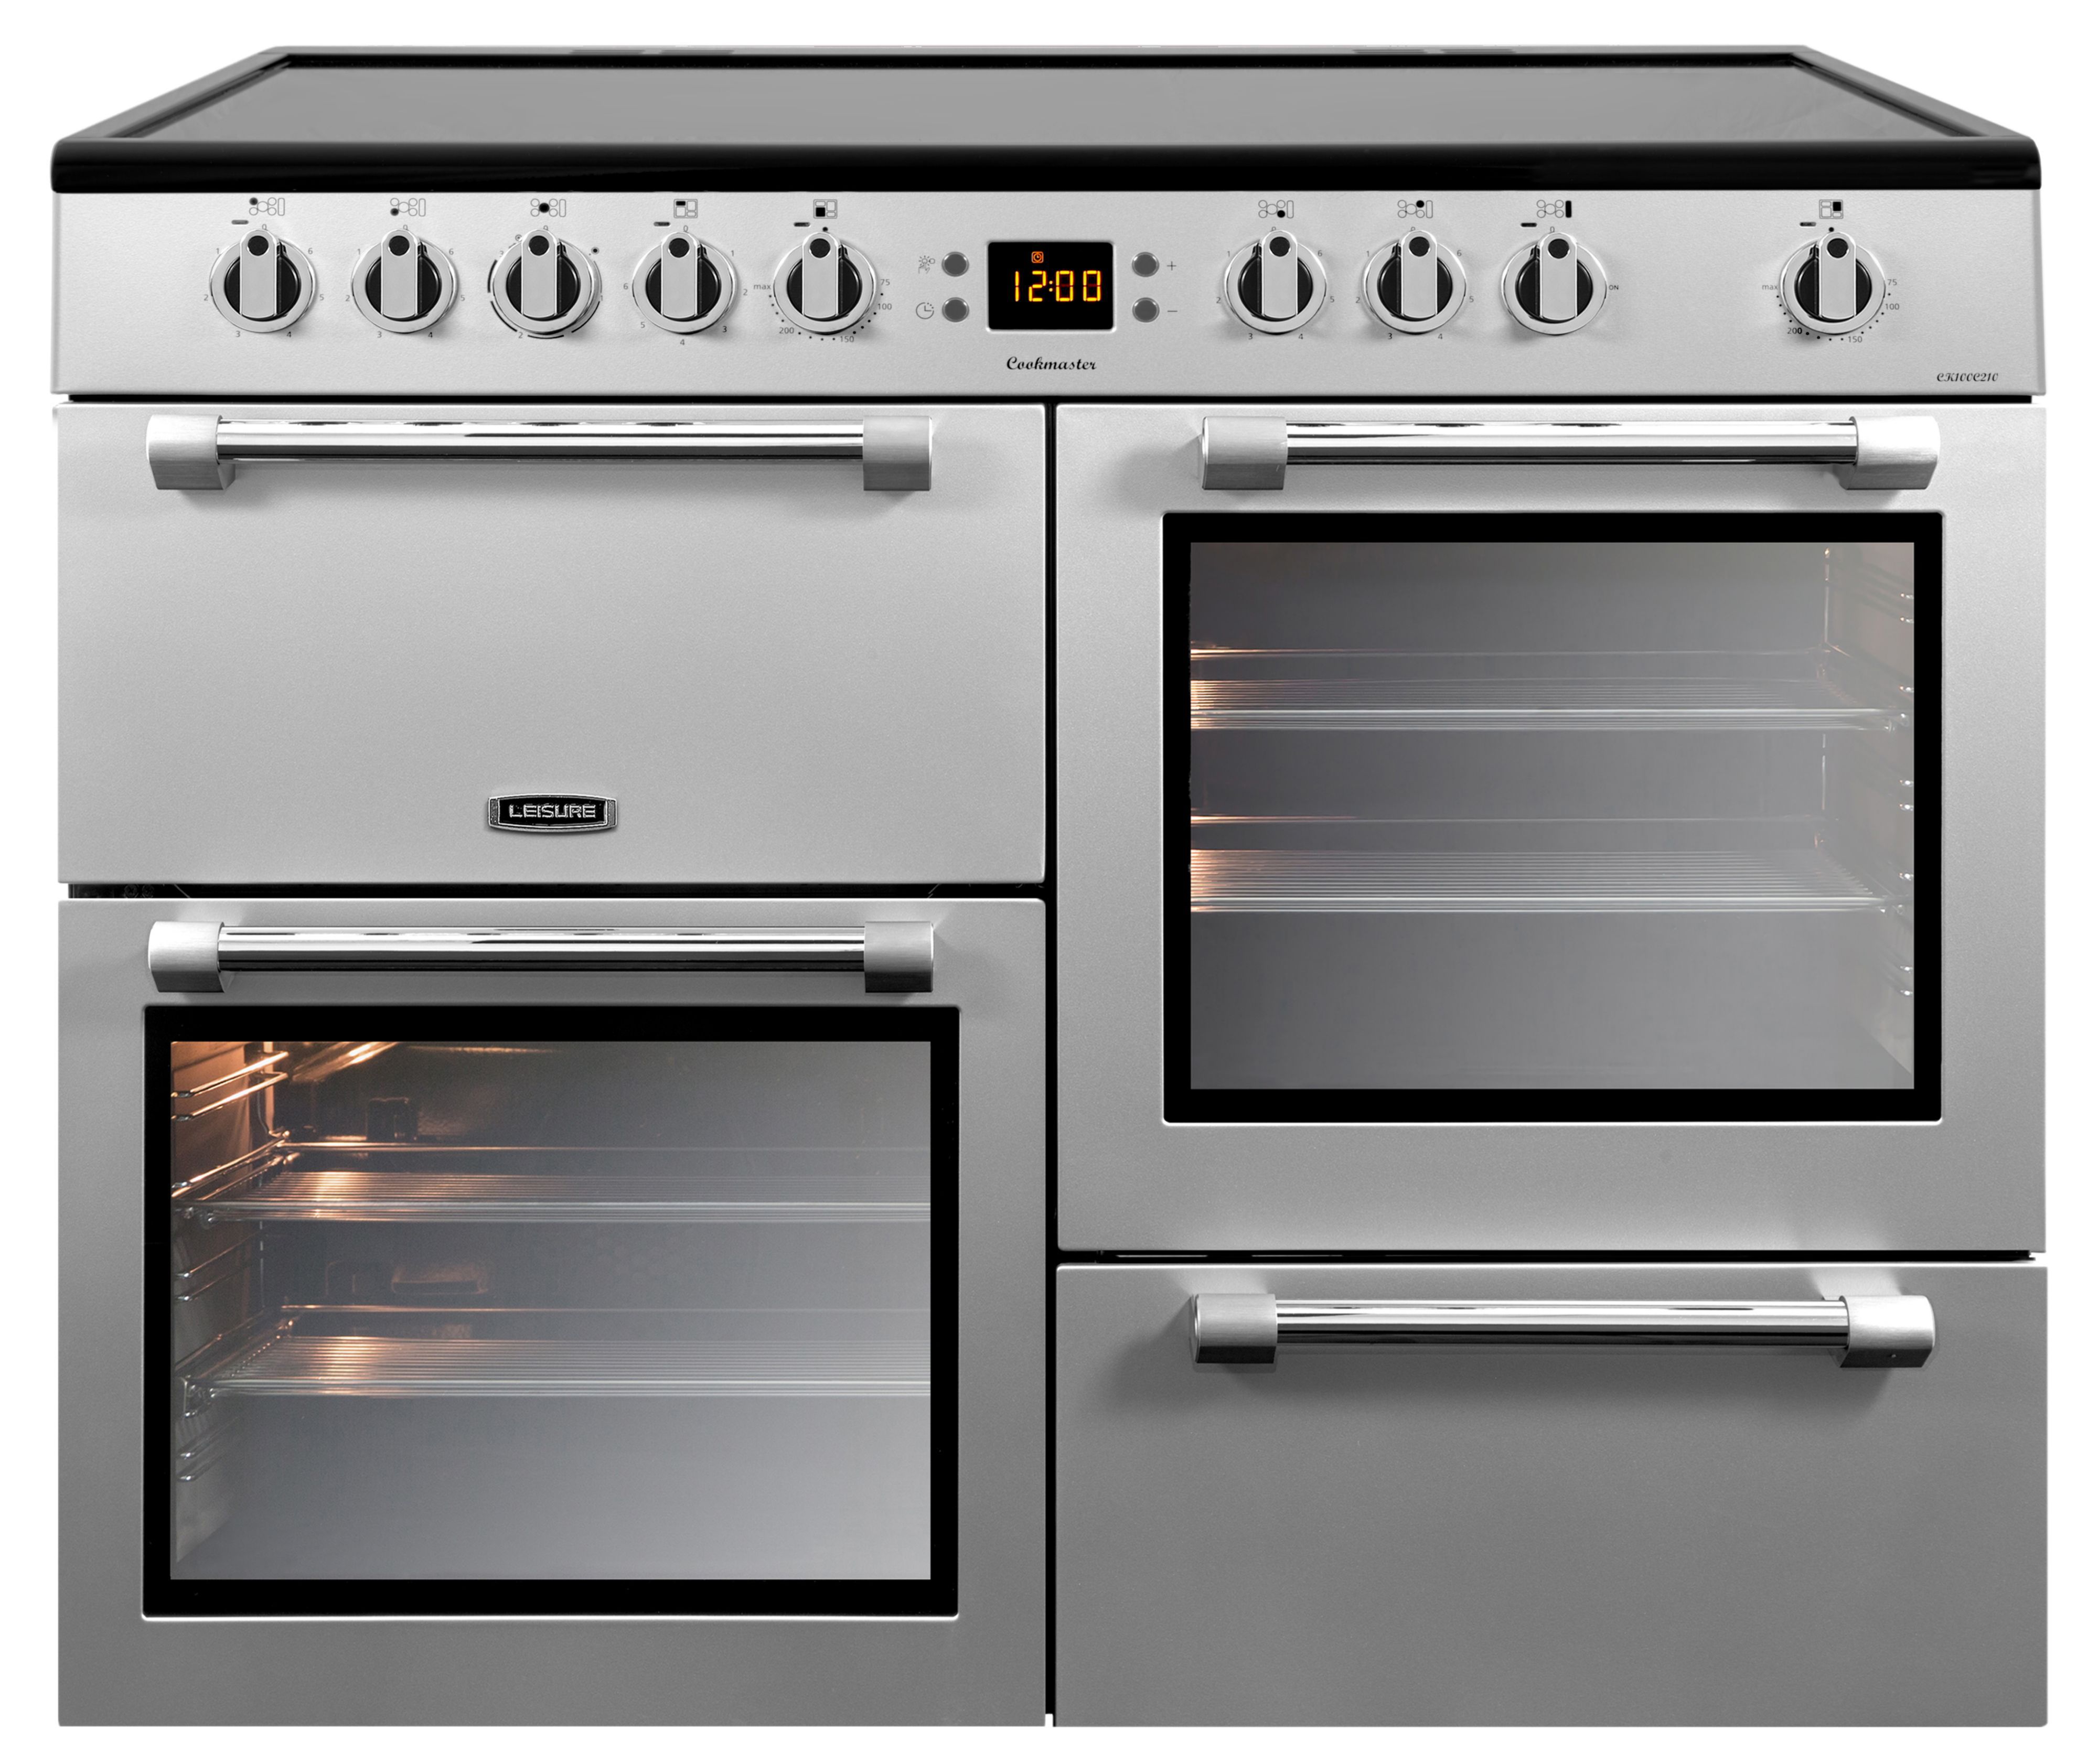 Leisure CK100C210K Freestanding Electric Range cooker with Electric Hob - Stainless steel effect